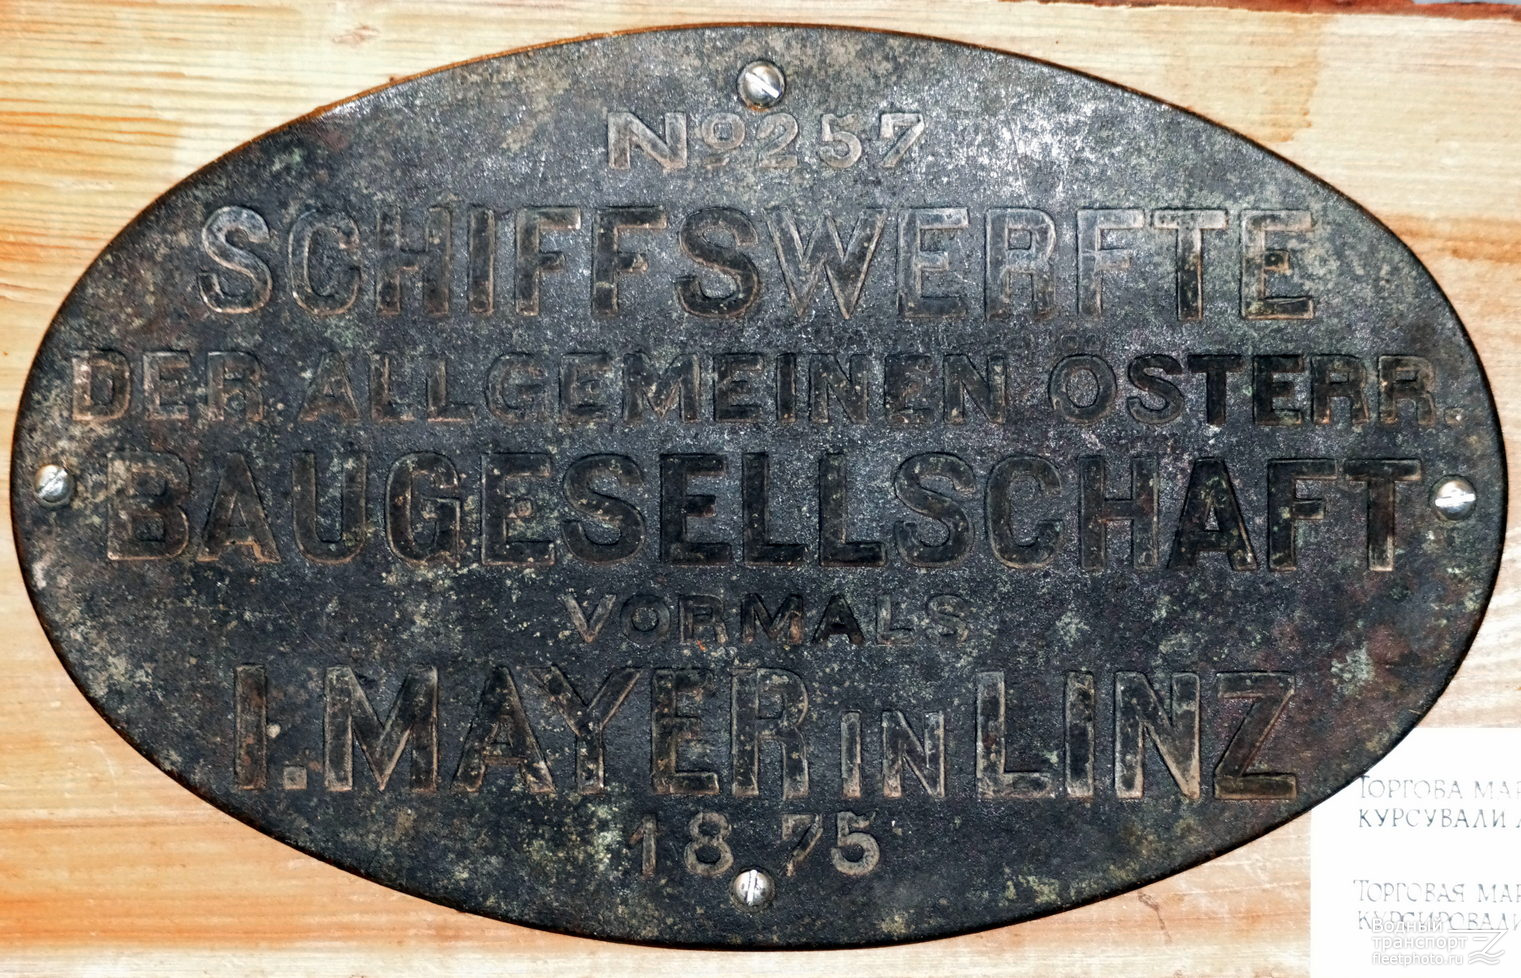 Unidentified ships, Shipbuilder's Makers Plates